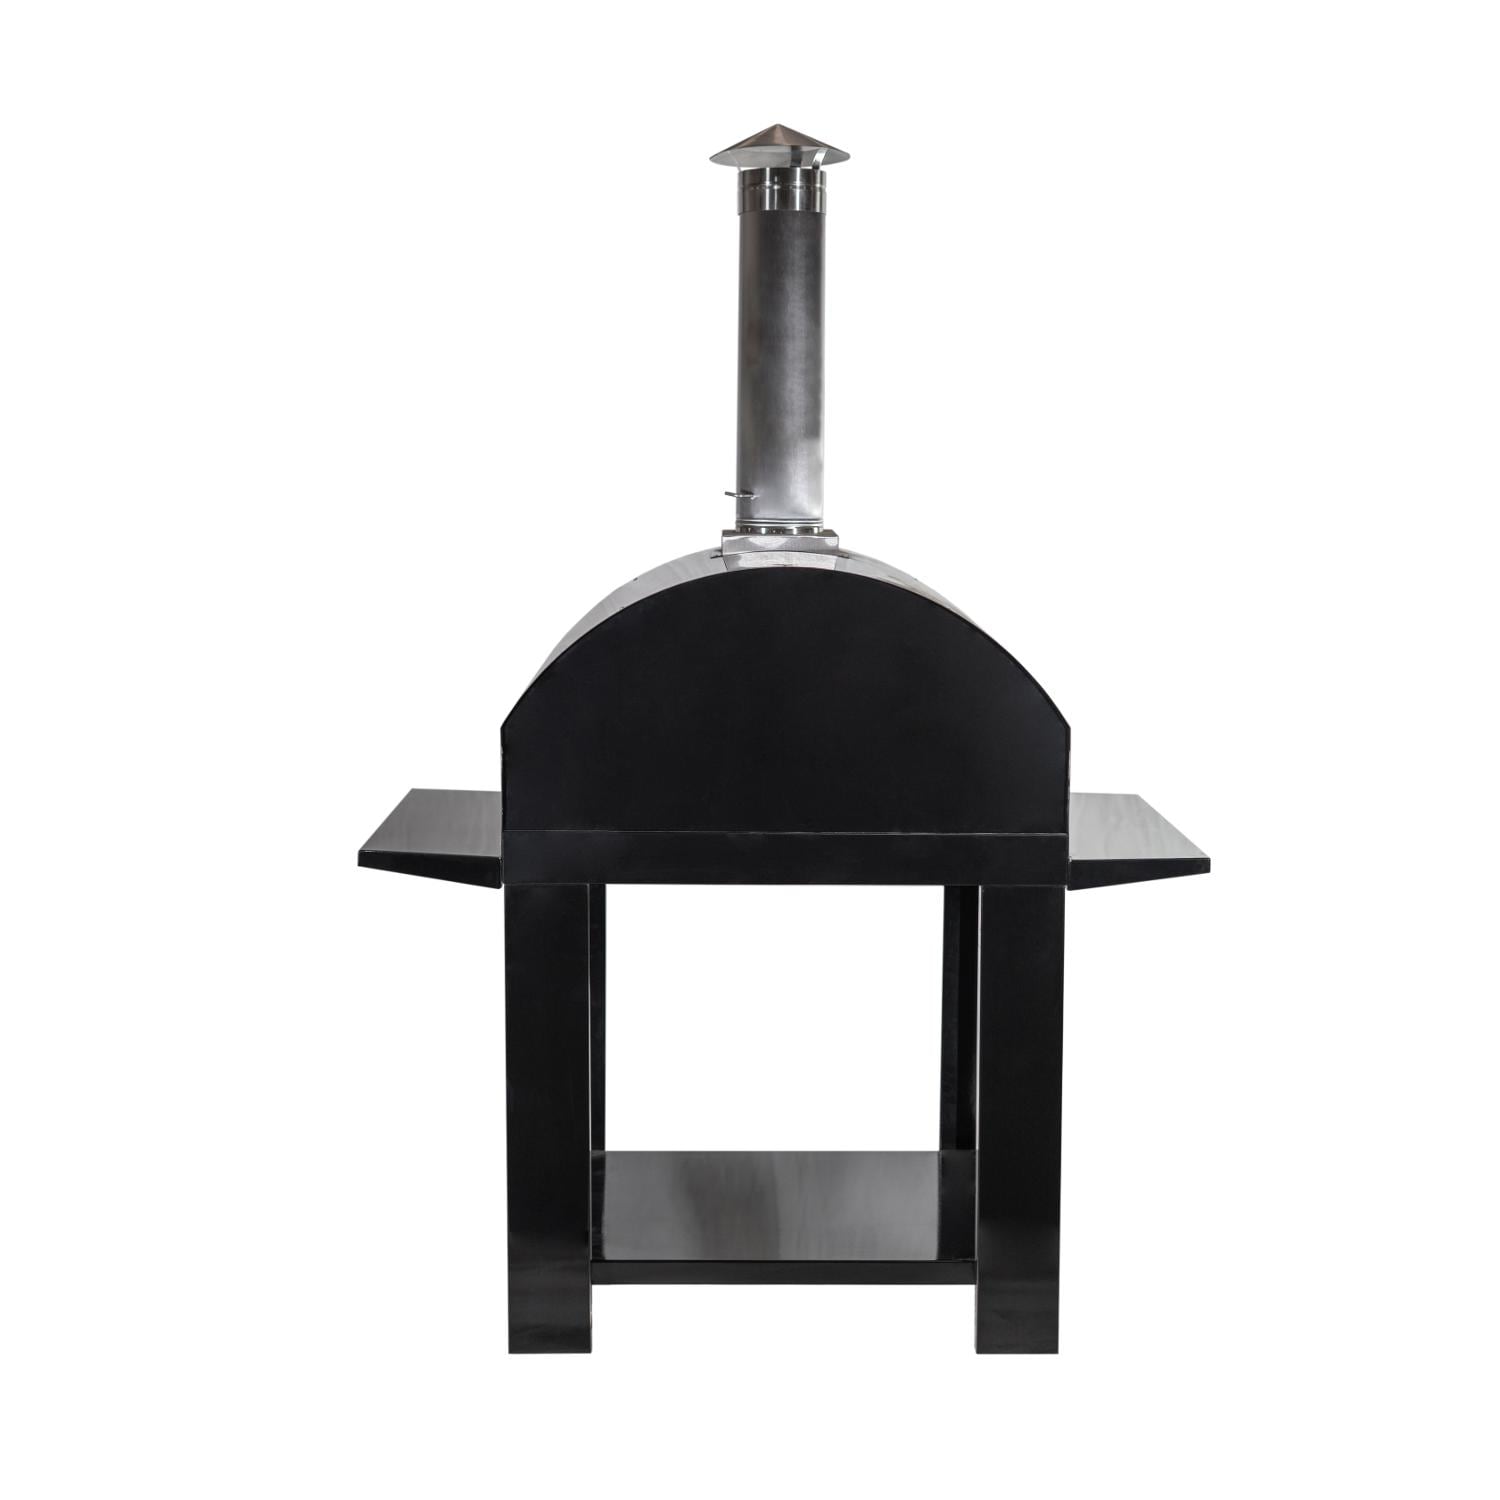 Nuke 31 Inch Outdoor Wood Fired Stainless Steel Freestanding Pizza Cooking Oven - image 5 of 6